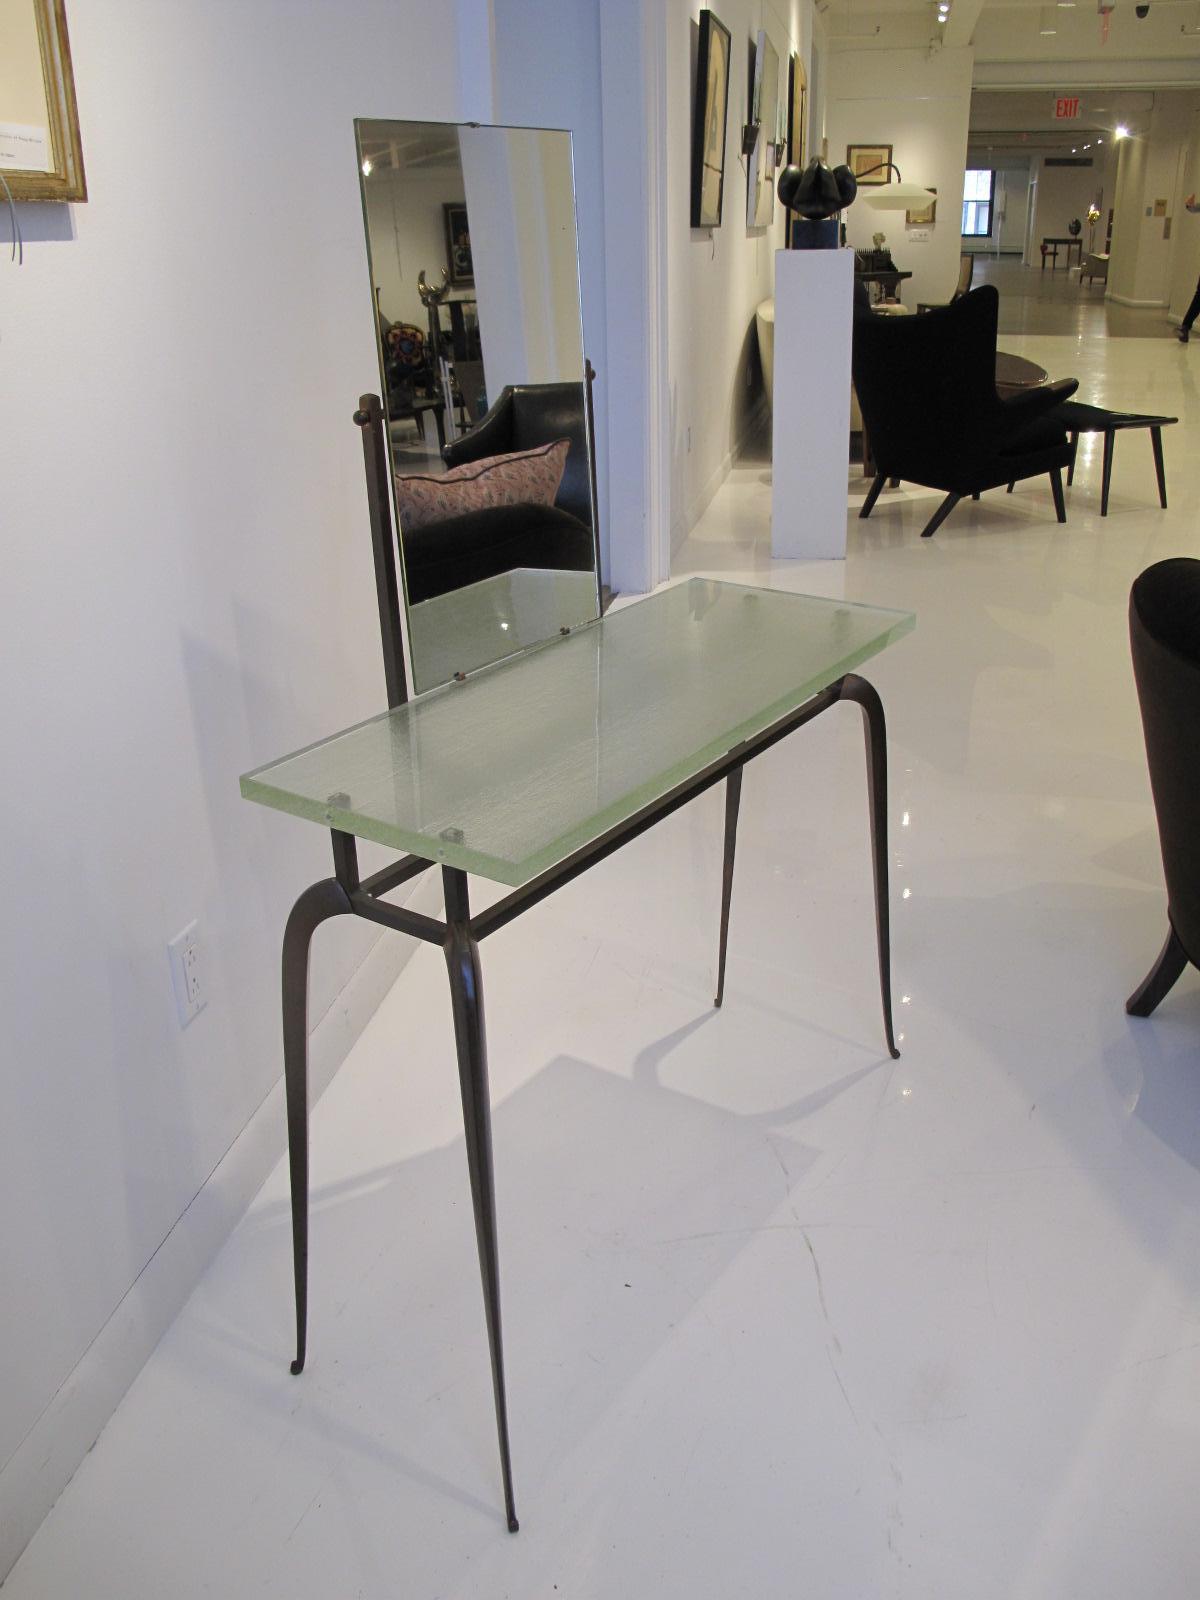 Stylish Art Deco vanity attributed to Rene Drouet, fitted with original St Gobin glass top.